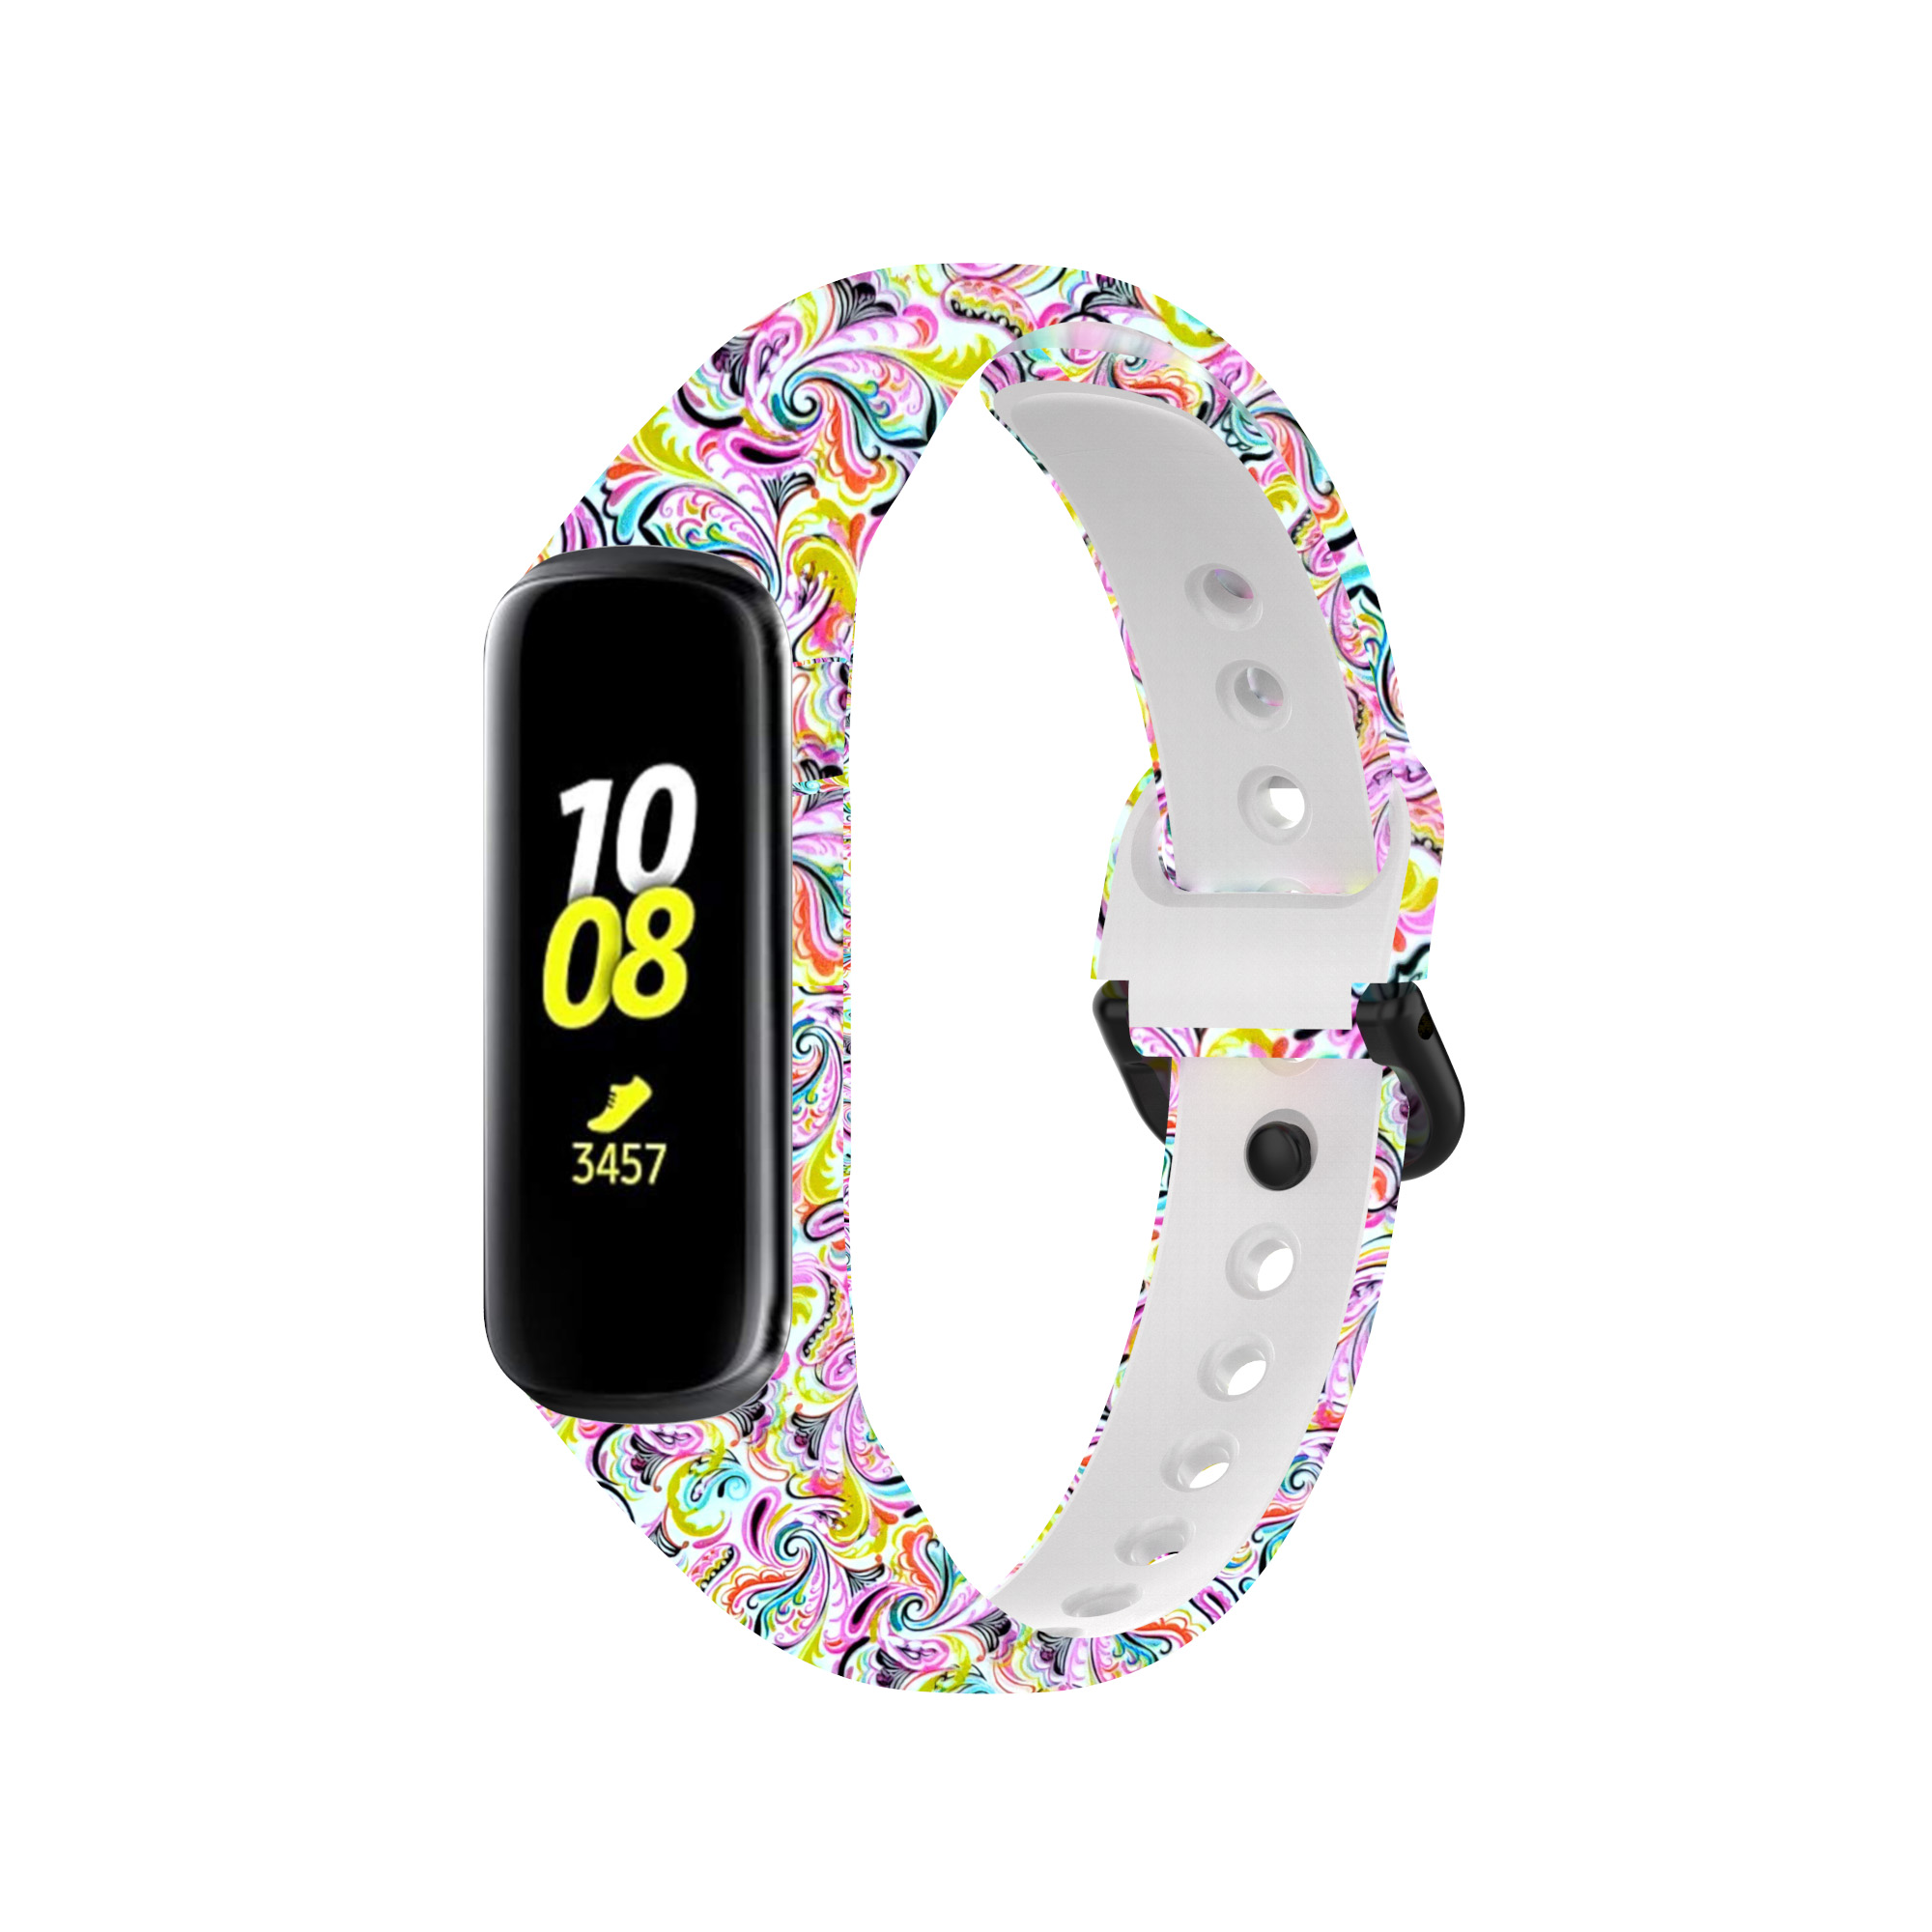 Bakeey-Printed-Pattern-Stainless-Steel-Buckle-Smart-watch-Band-Replacement-Strap-For-Samsung-Galaxy--1806217-15